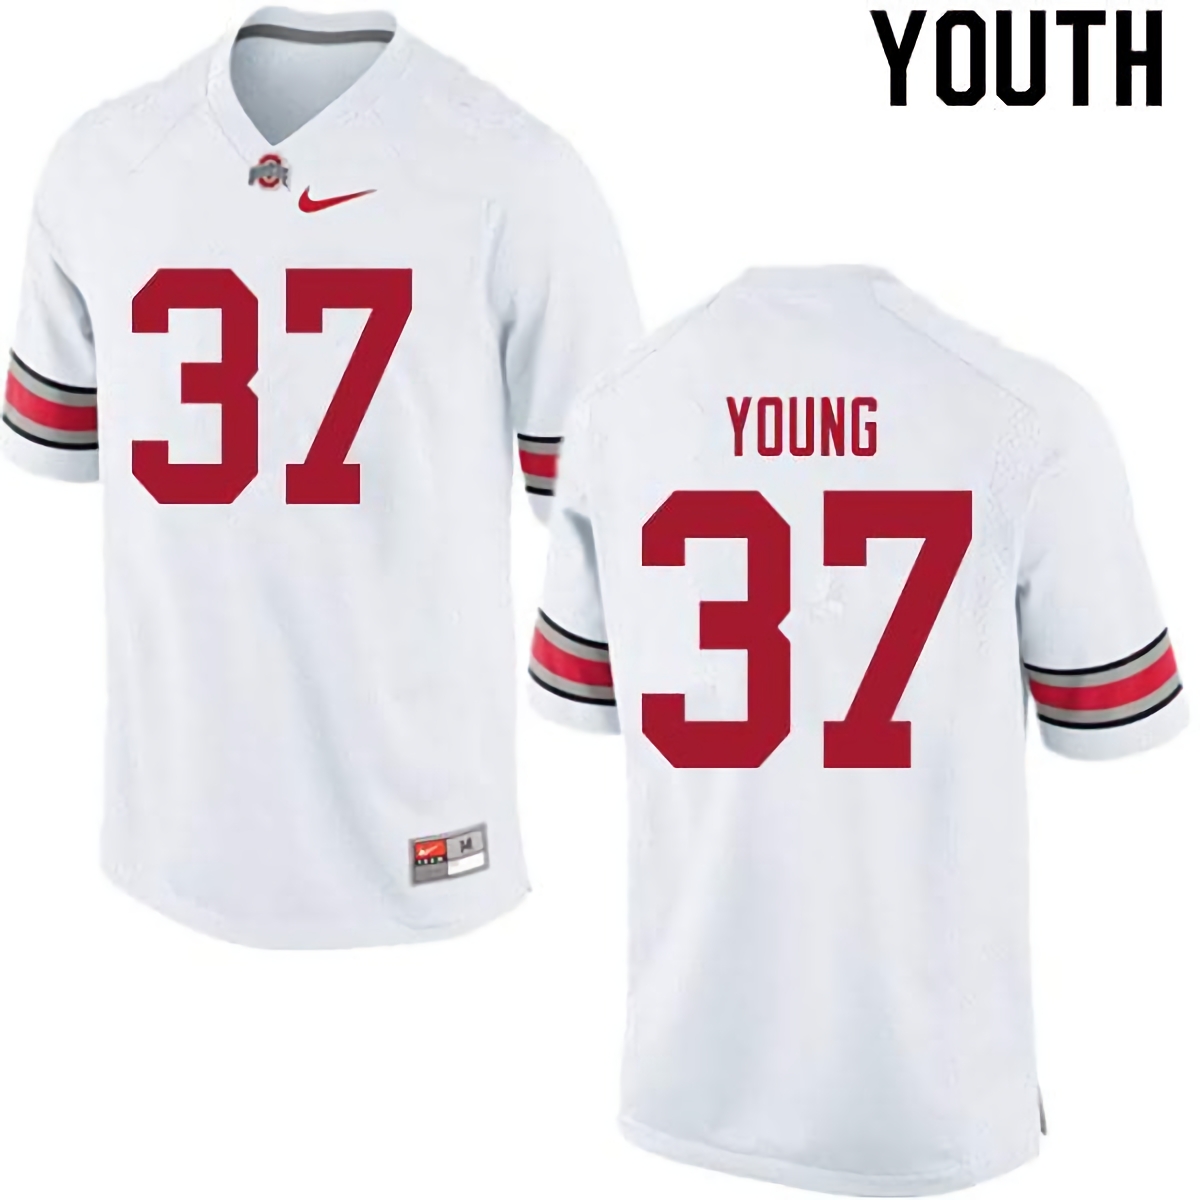 Craig Young Ohio State Buckeyes Youth NCAA #37 Nike White College Stitched Football Jersey JBU5256JD